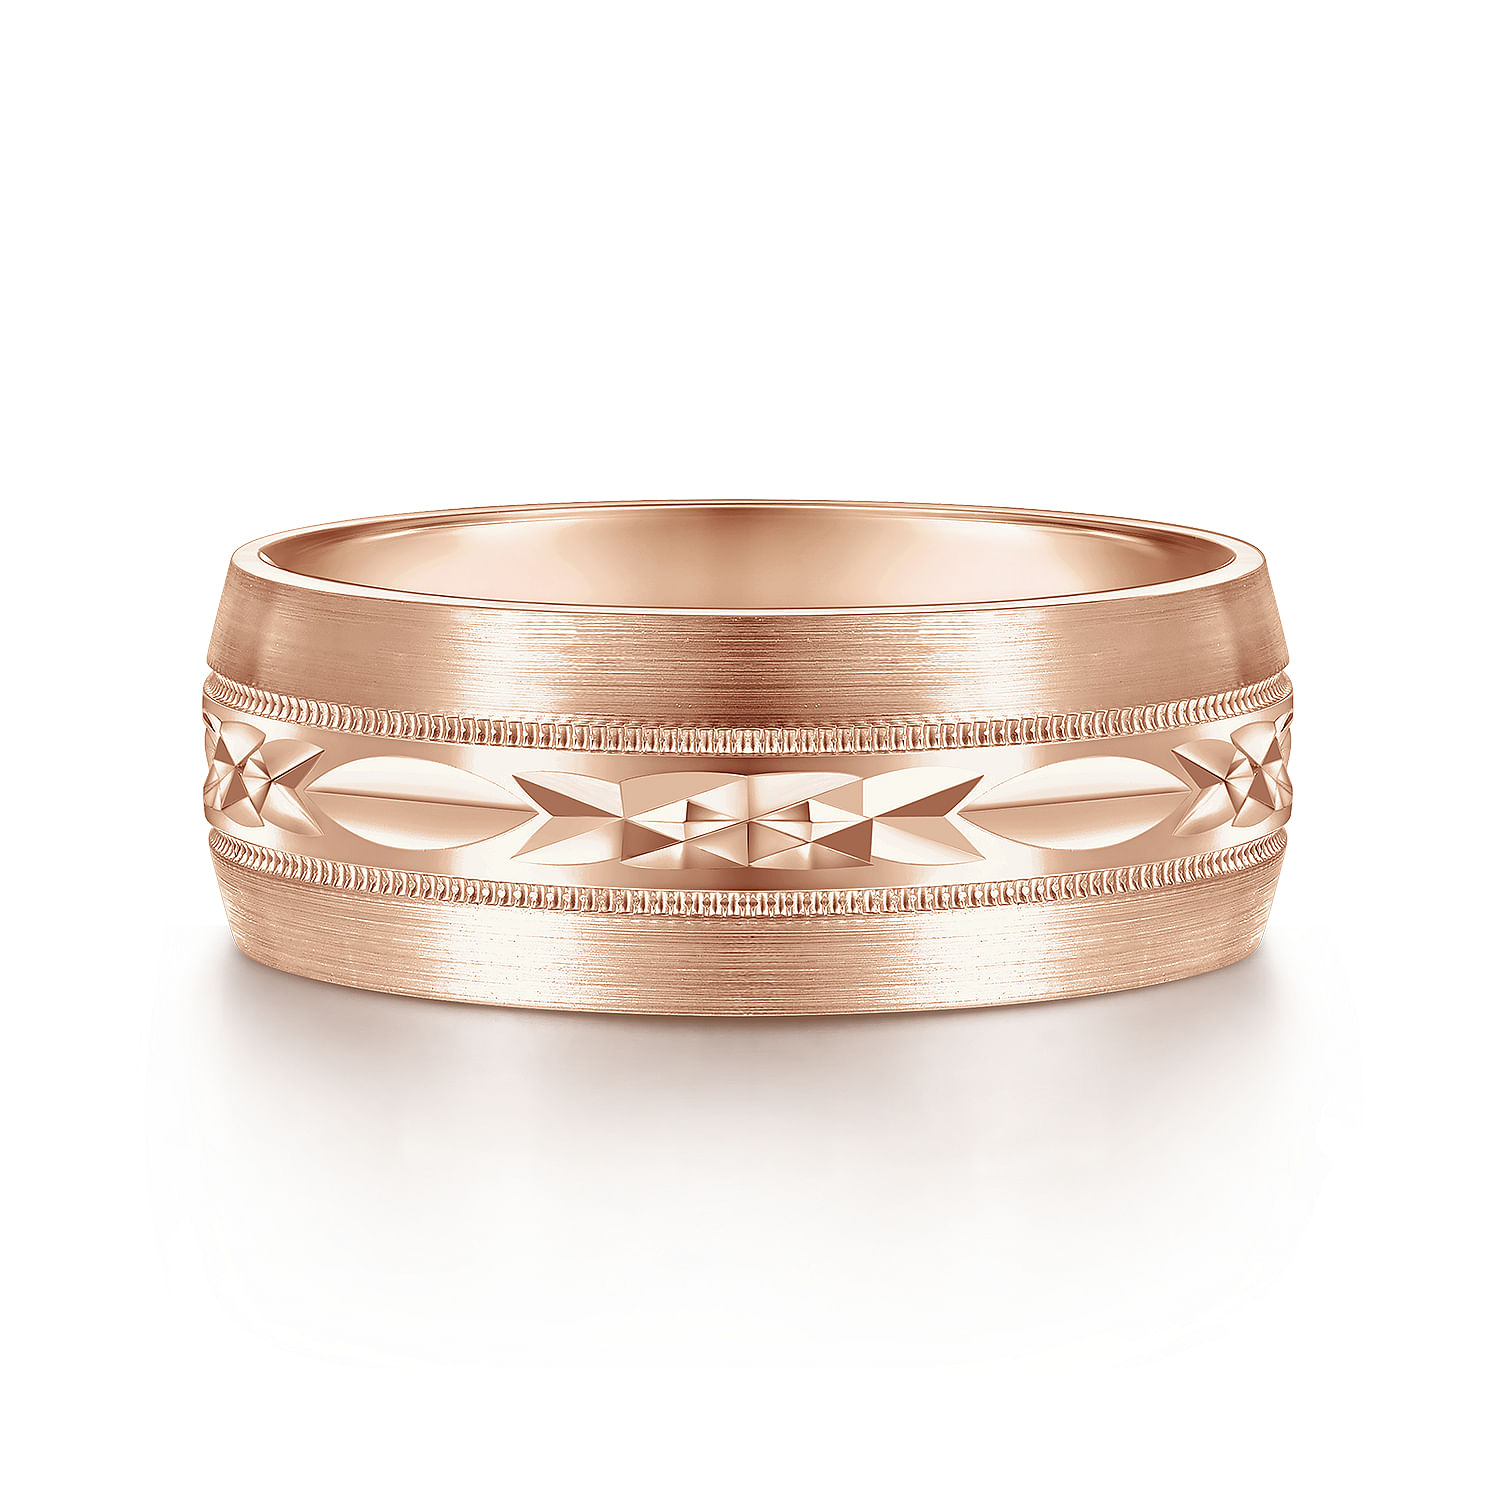 Russell---14K-Rose-Gold-8mm---Engraved-Men's-Wedding-Band-in-Satin-Finish1